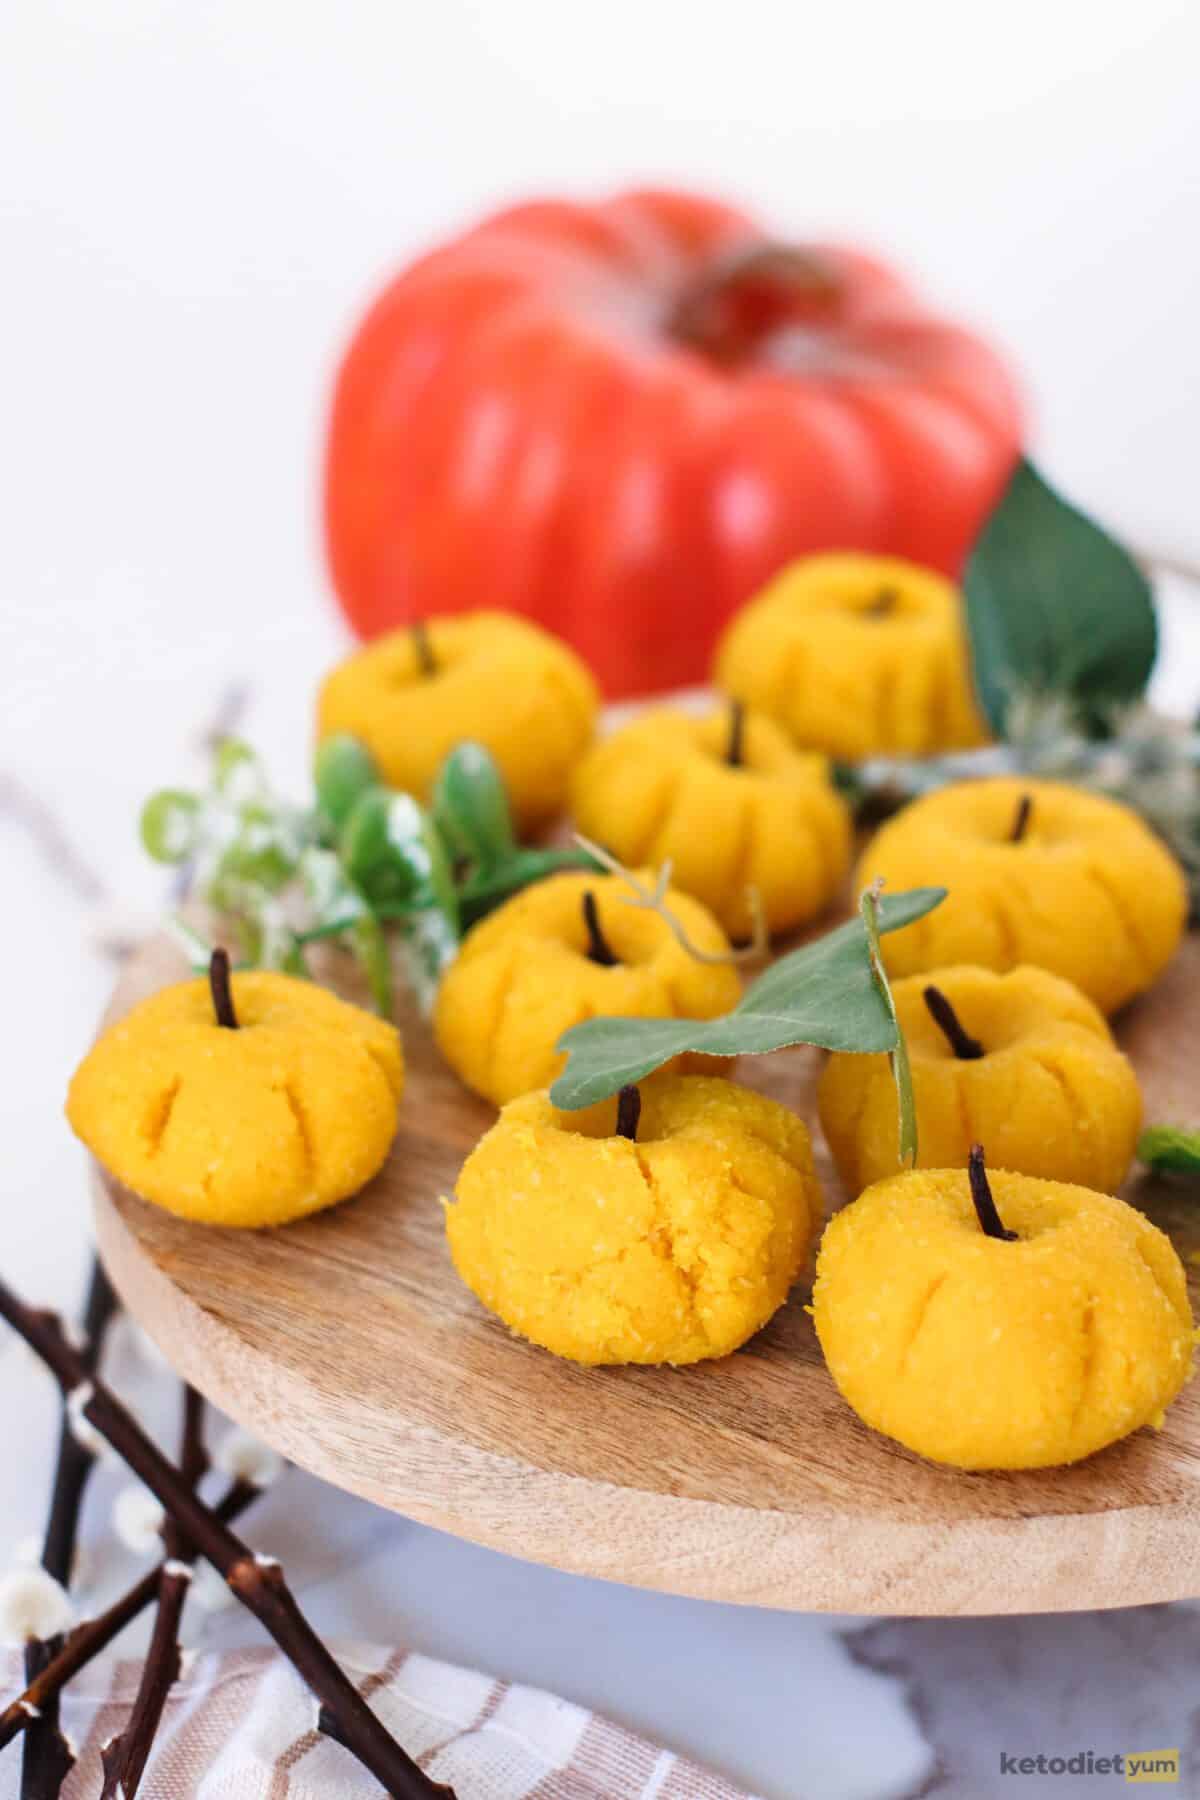 8 marzipan pumpkins on a serving board with a pumpkin in the background